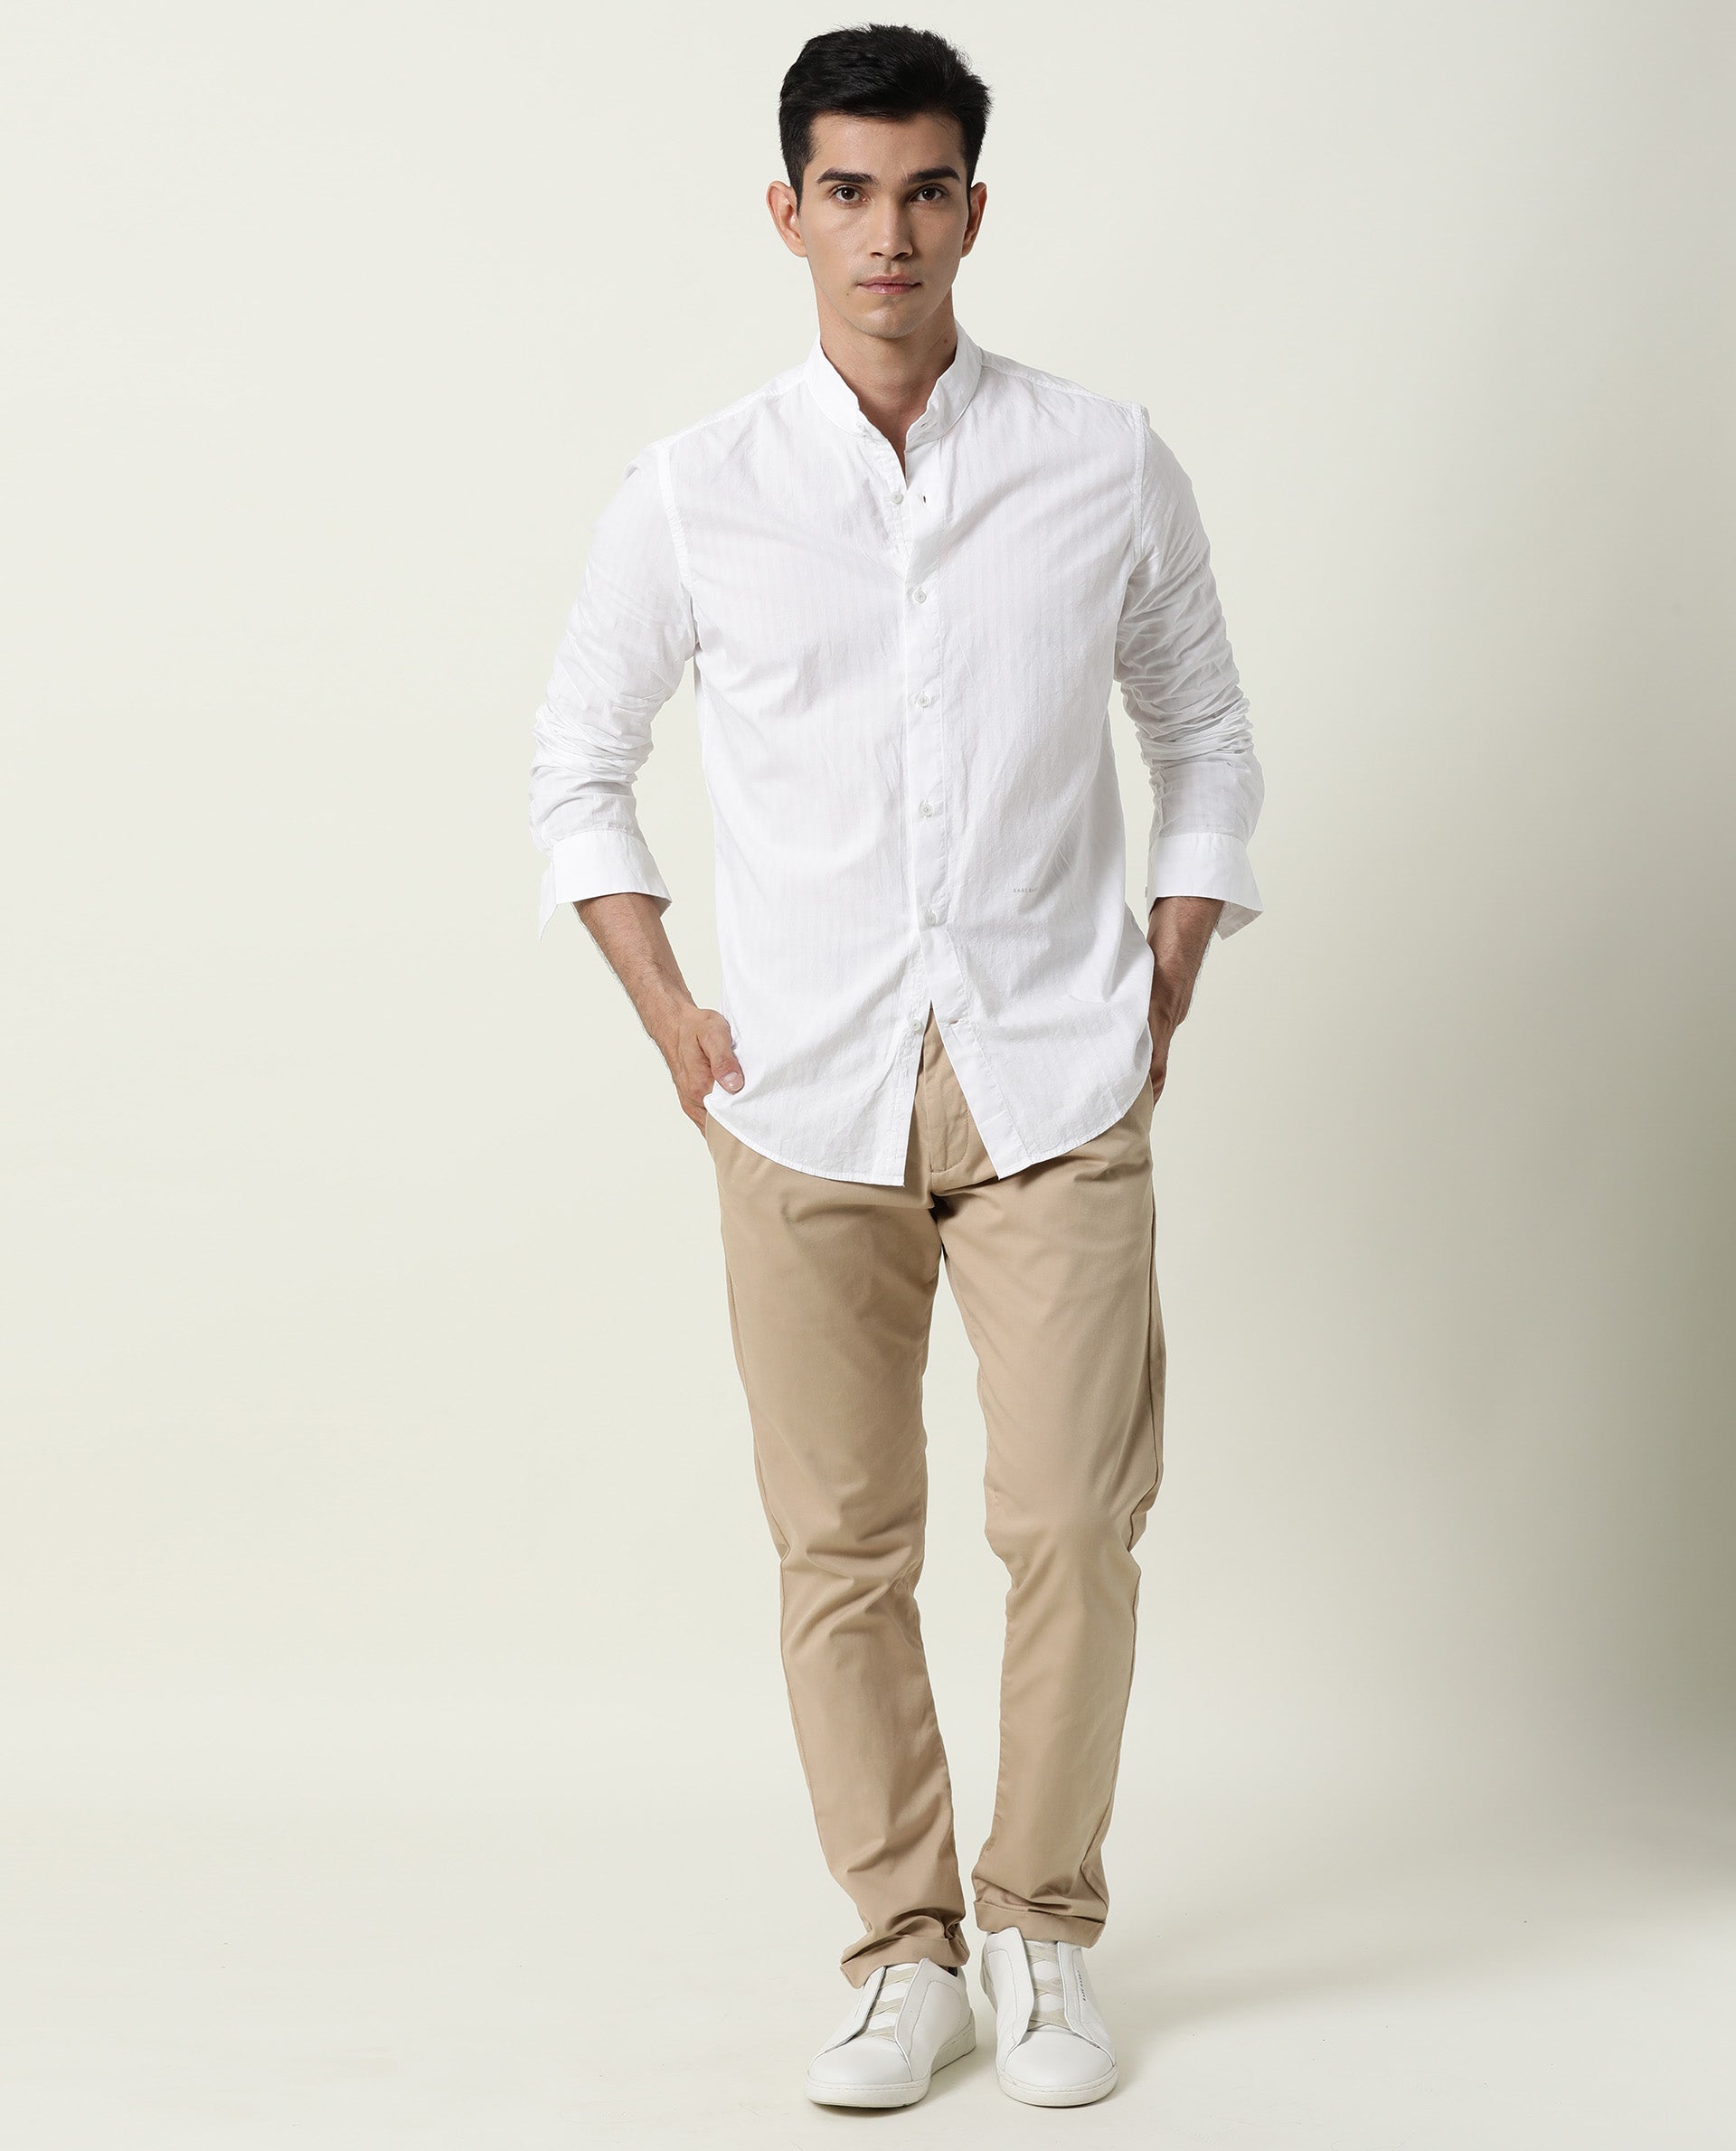 5 White Pants Outfits For Men  LIFESTYLE BY PS